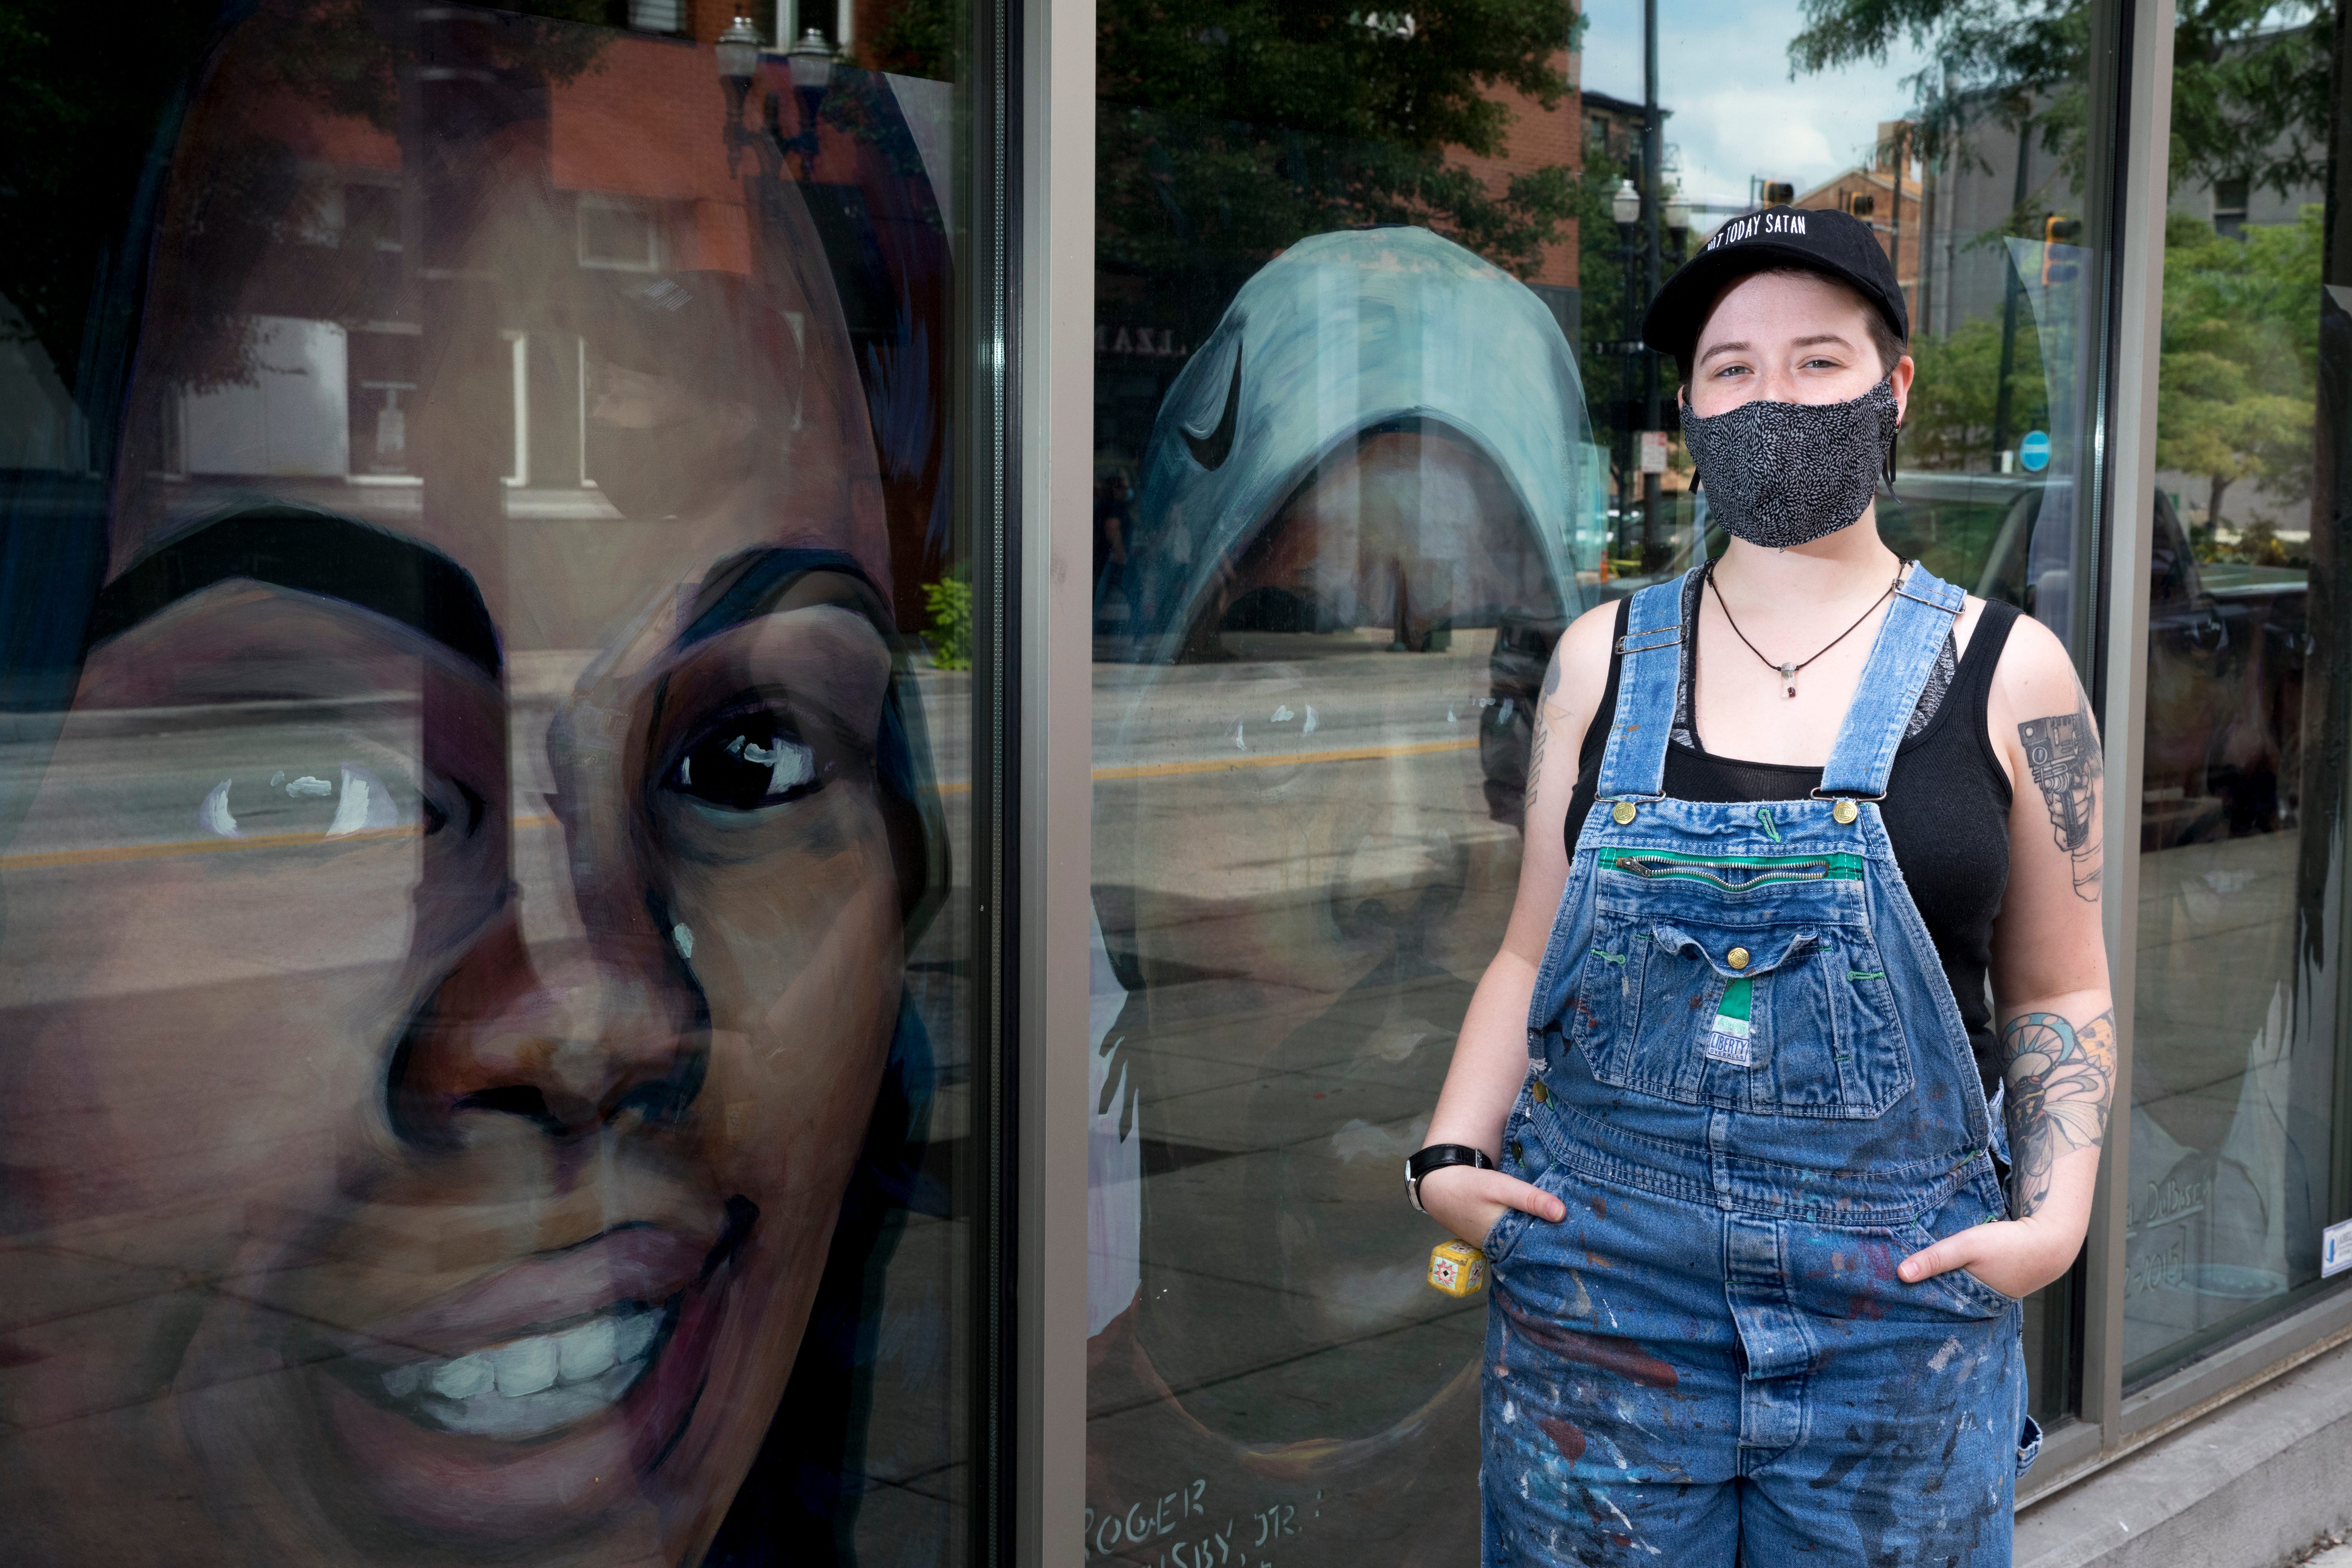 Rae Kuhn stands outside Ensemble Theatre Cincinnati, where she works as a scenic artist, in Over-The-Rhine on Aug. 4. "I'm extremely lucky that my place of business was open to me producing portraits of some of the victims of police police brutality," Kuhn said. Kuhn's donated portraits of Timothy Thomas, Samuel DuBose, Breonna Taylor and Roger Owensby Jr., all of whom died at the hands of police.